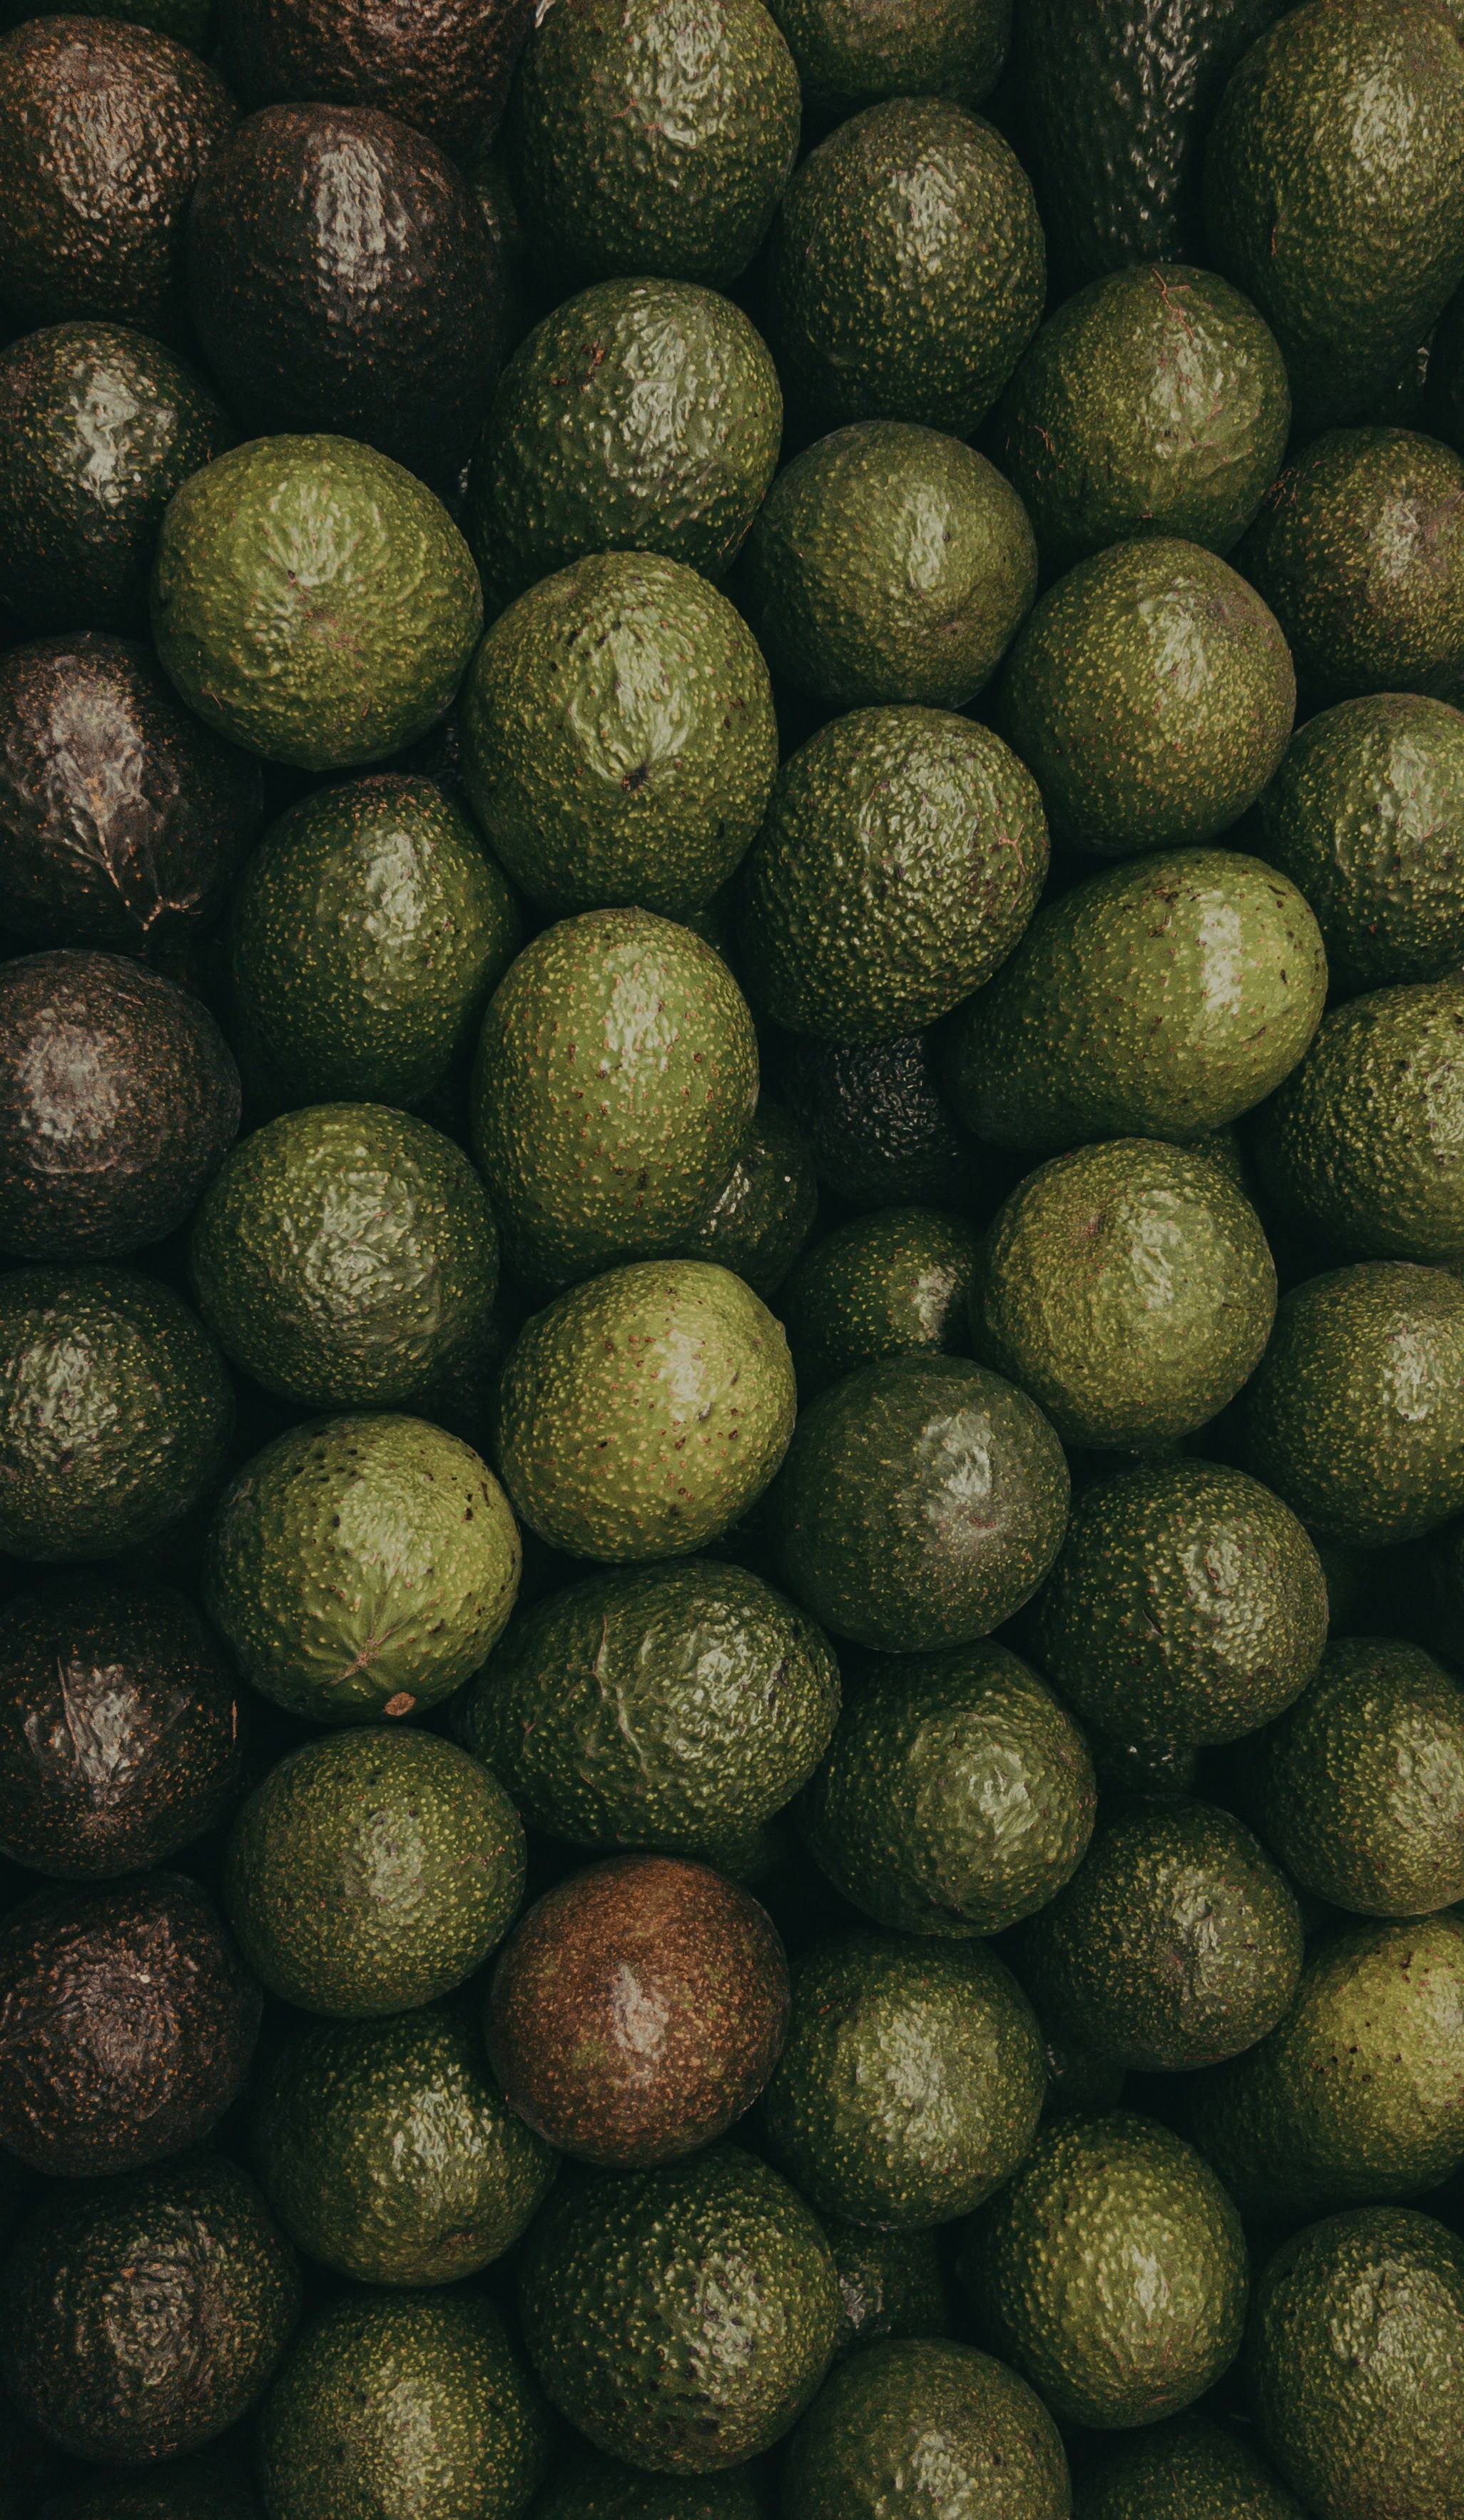 How to Freeze Ripe Avocados and Keep Them Fresh